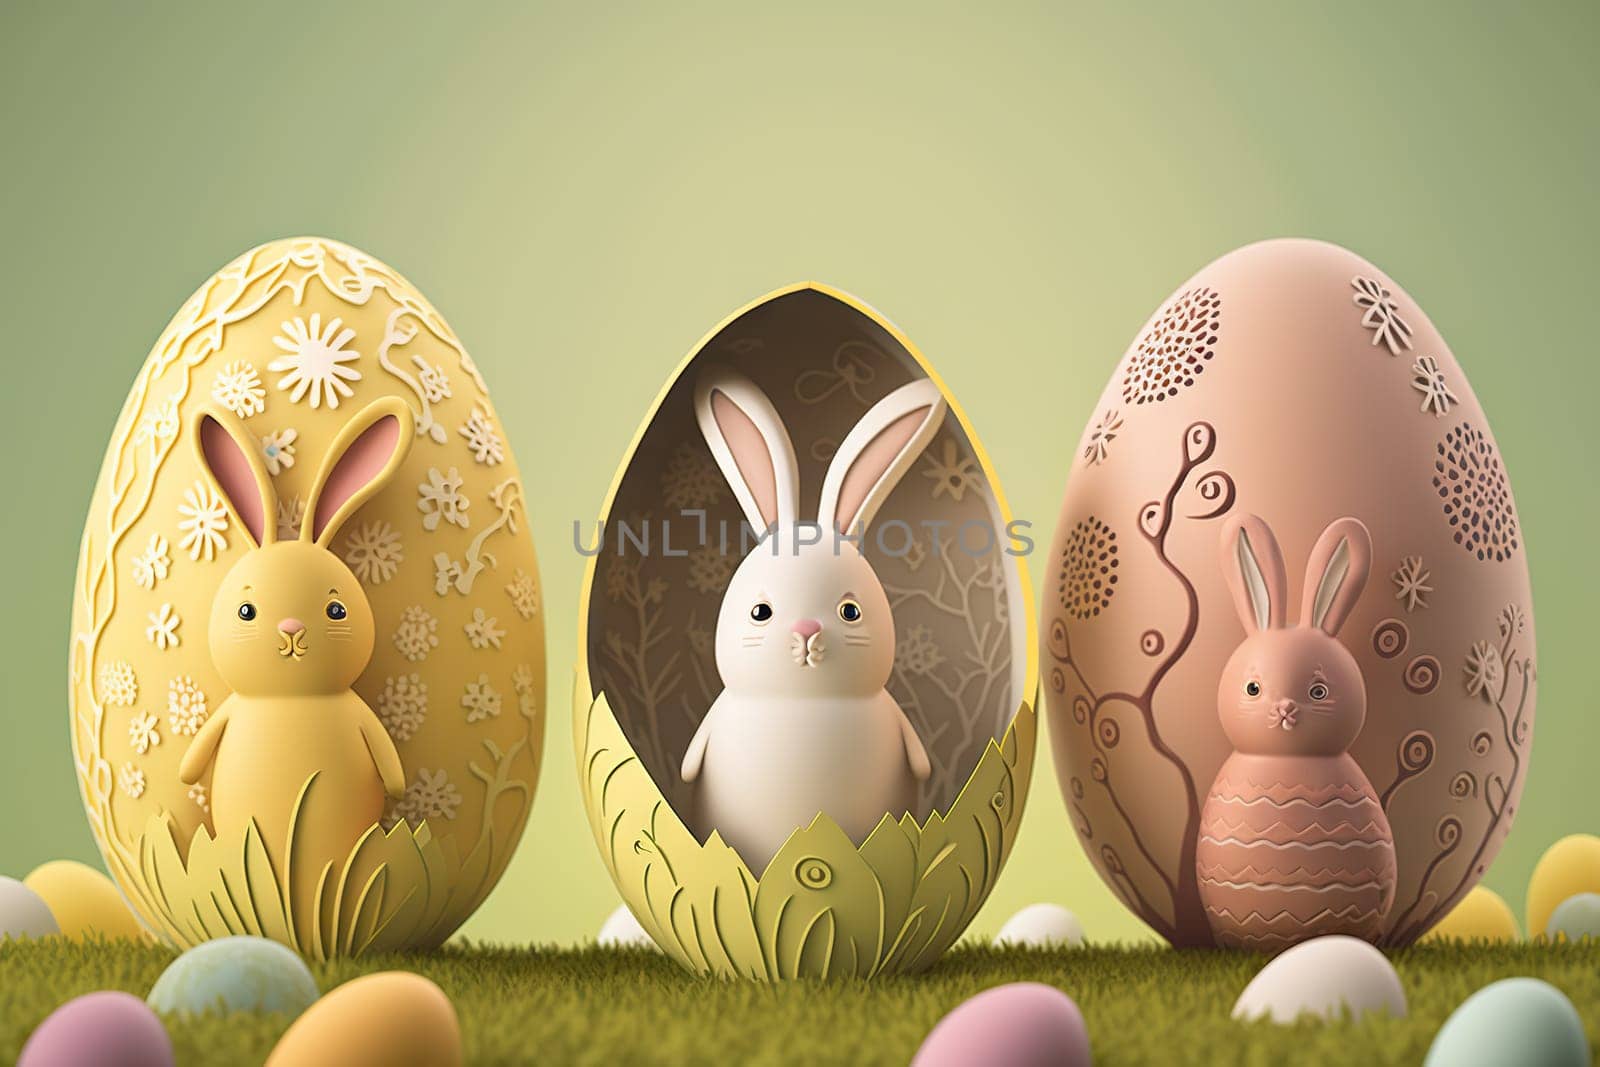 Illustration of three bunnies emerging from ornate Easter eggs on a grassy field - Generative AI